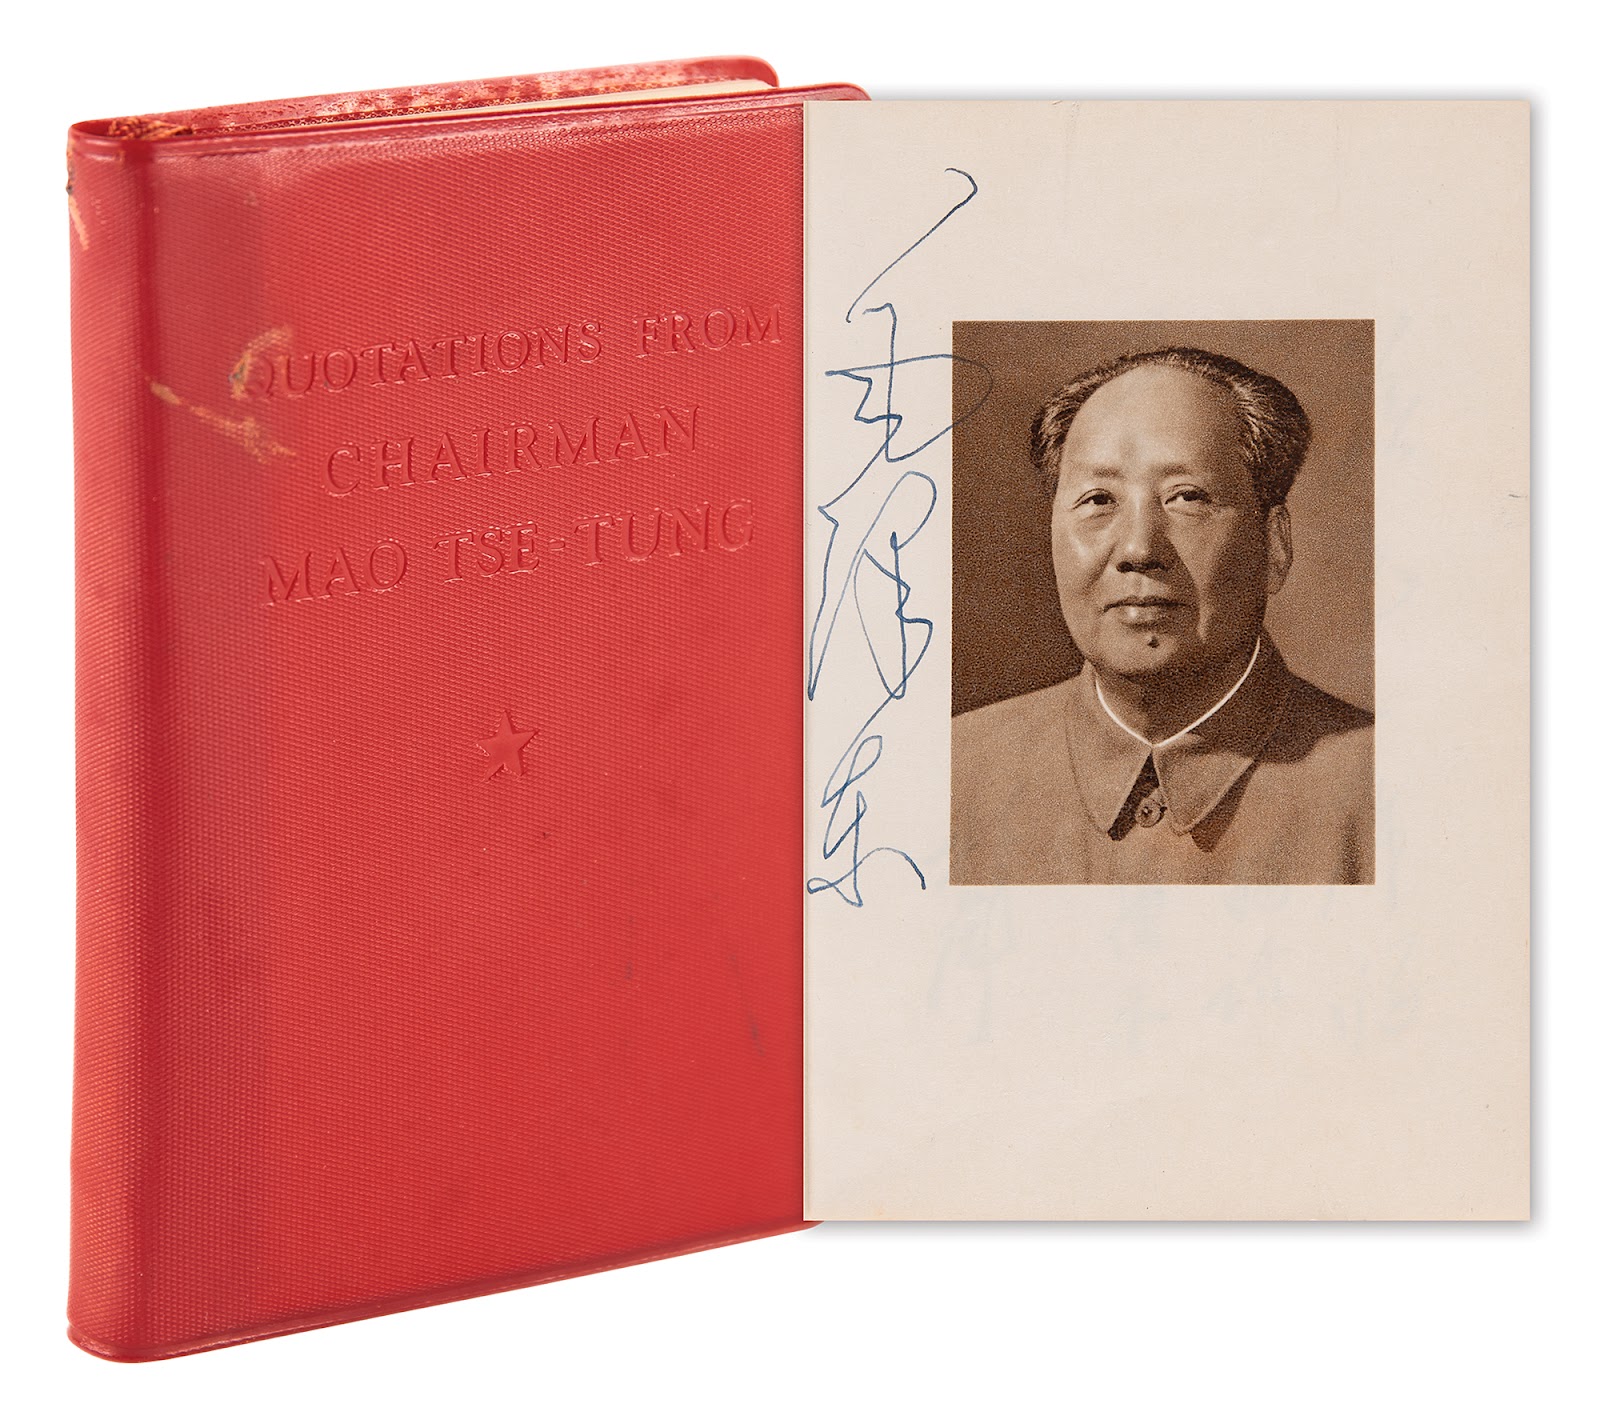 Signed first English edition of Quotations from Chairman Mao bound in red vinyl covers. The book is signed by Mao next to his frontispiece portrait.